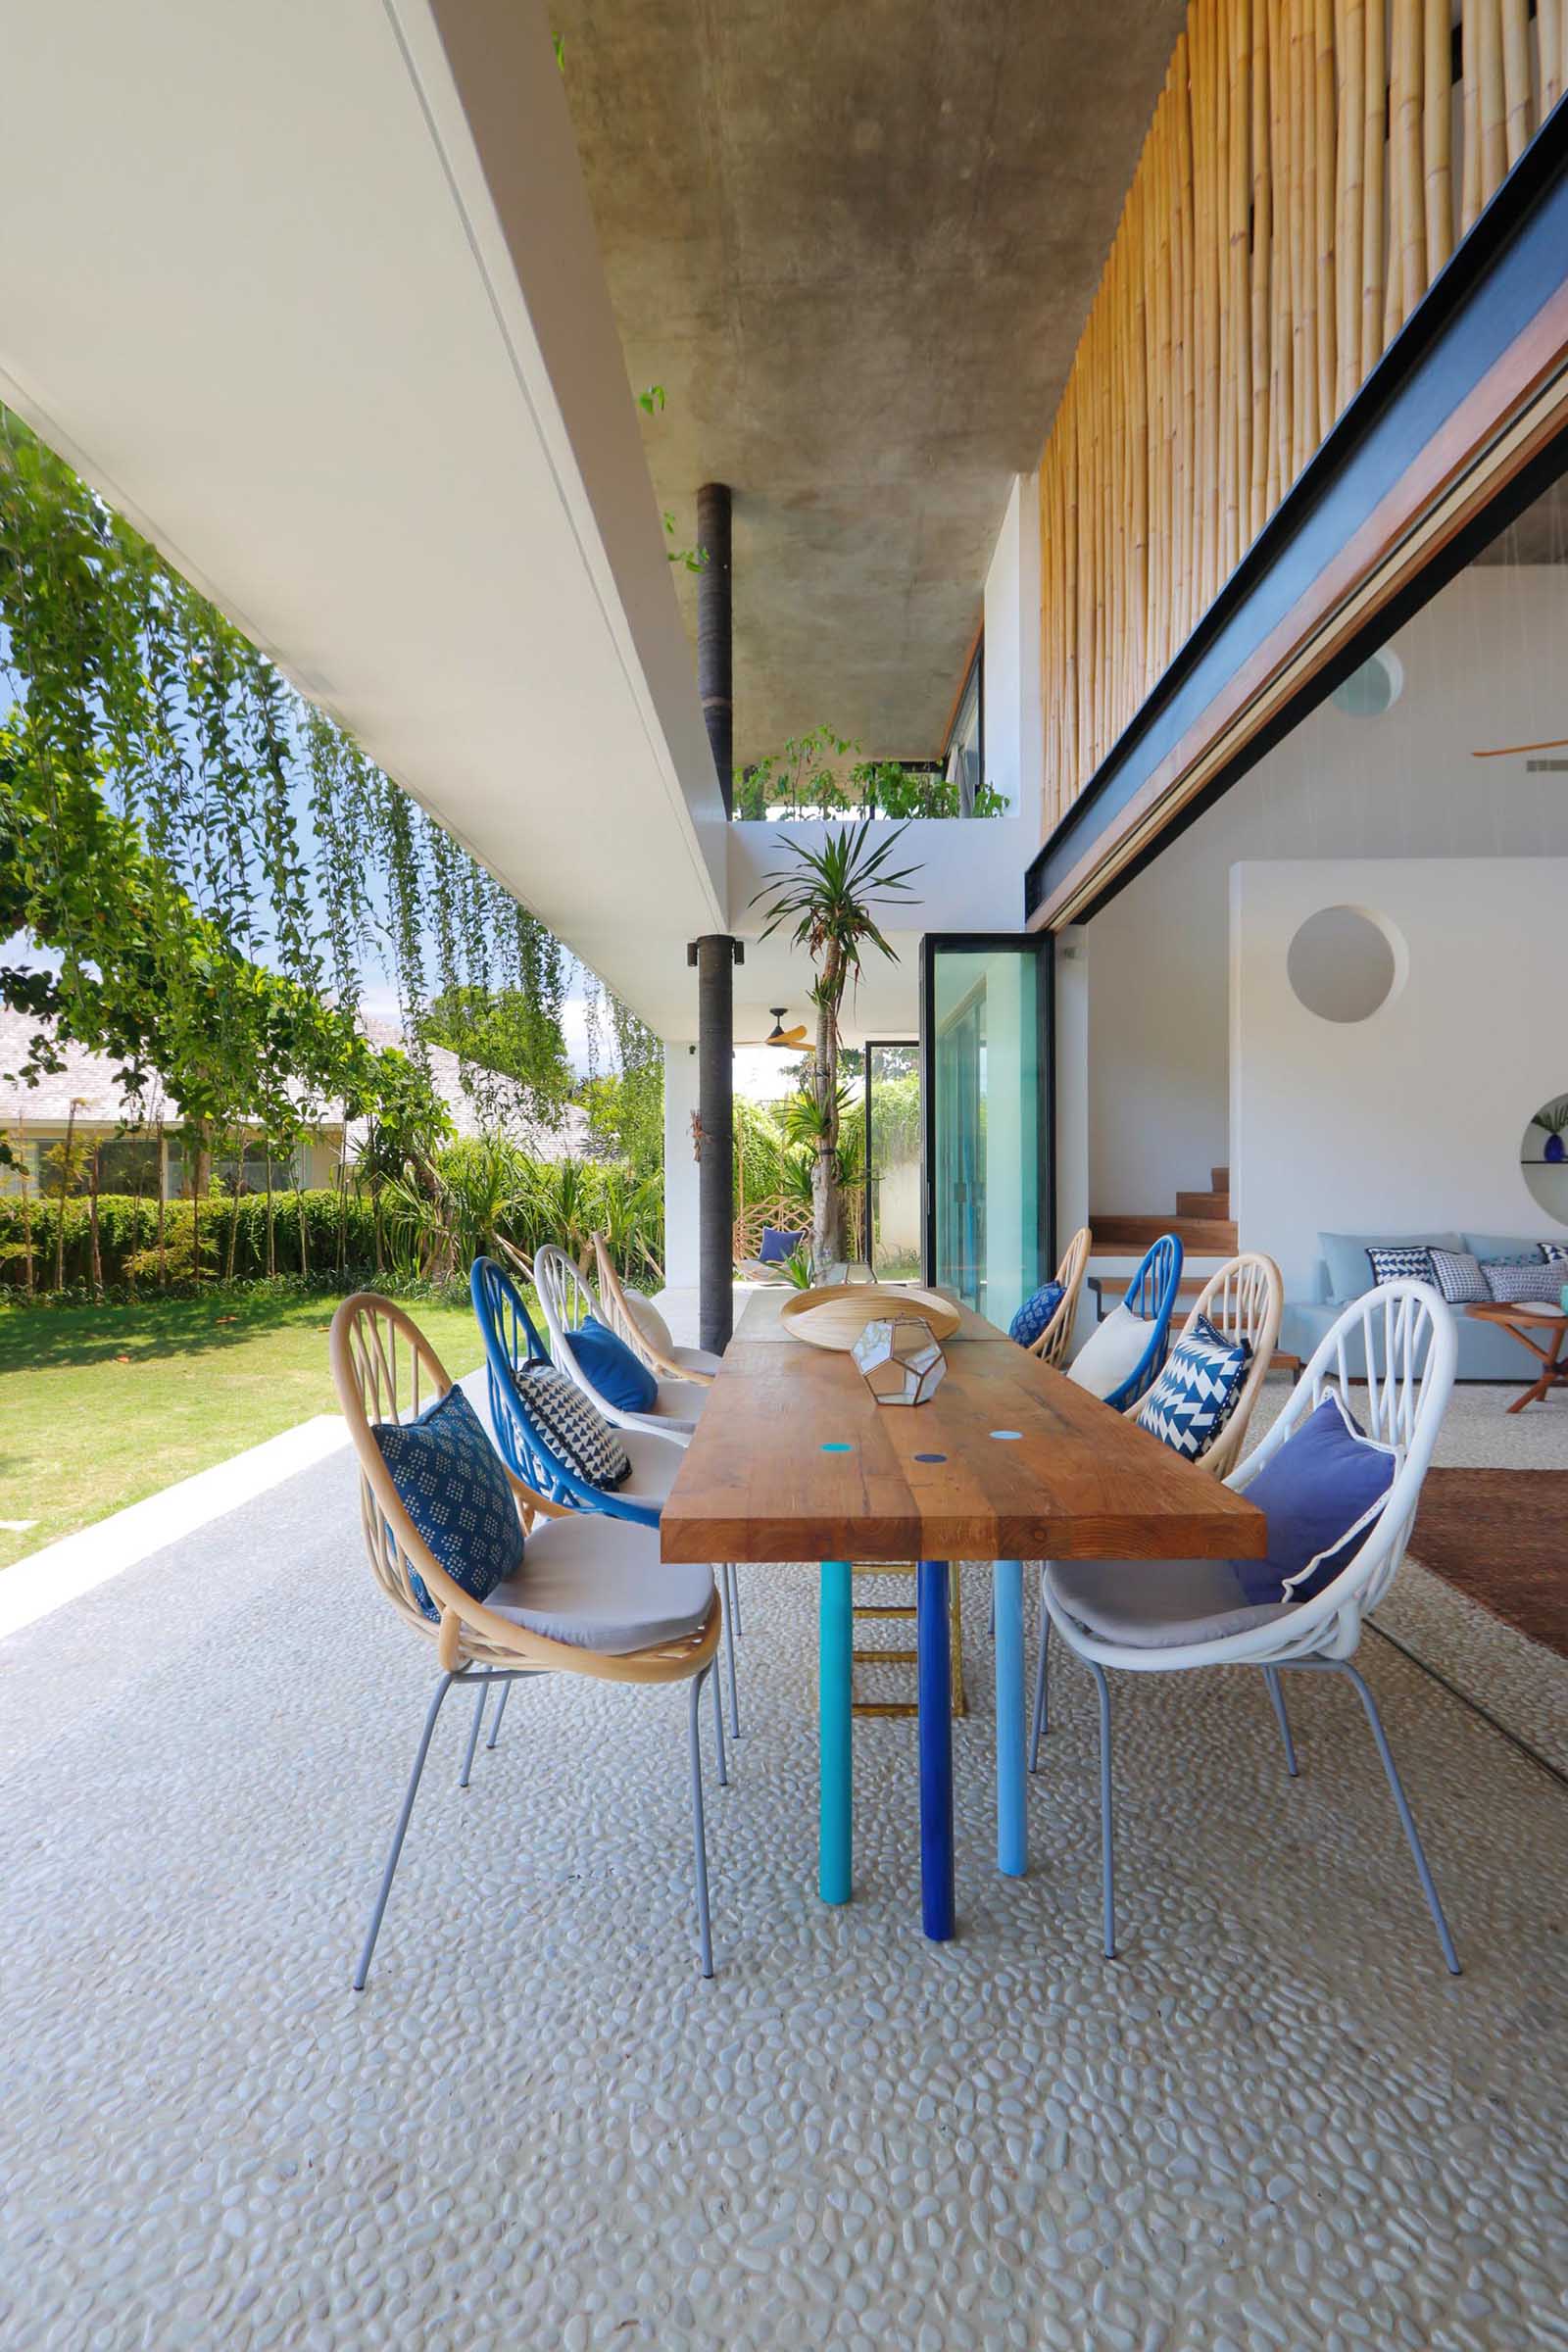 A modern beach house with a covered outdoor dining area.